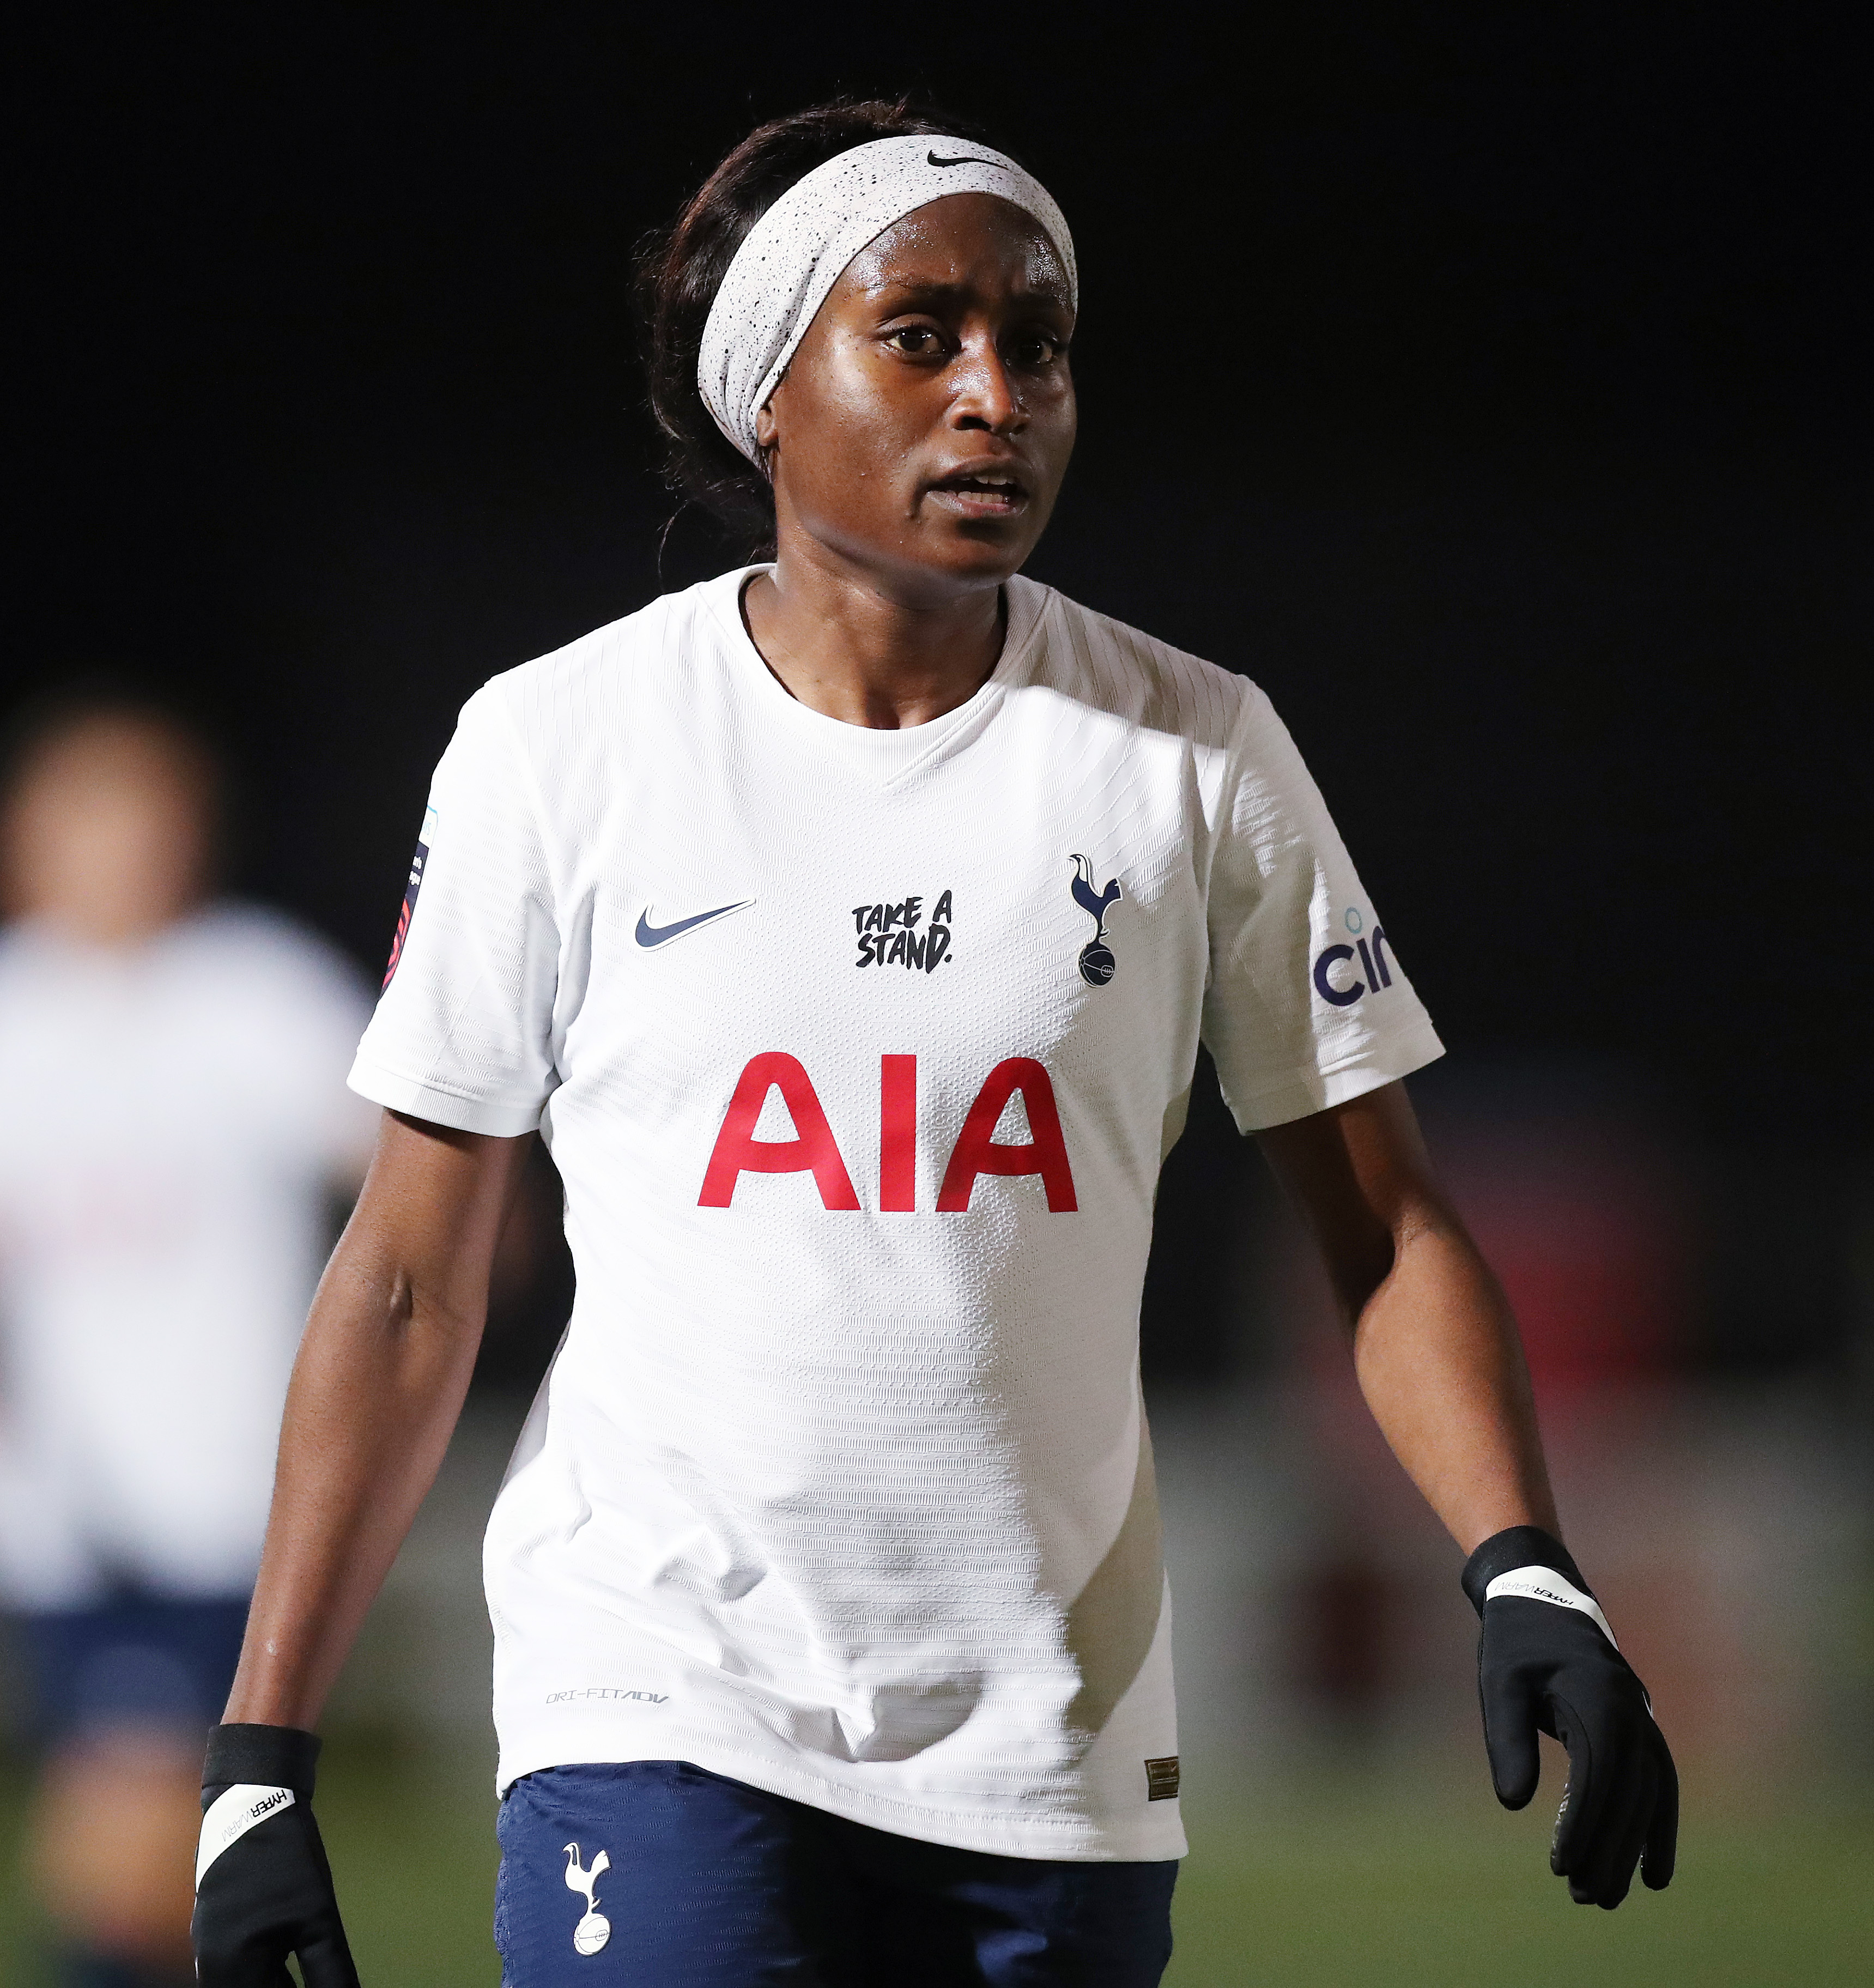 Coventry United Ladies v Tottenham Hotspur Women - FA Women’s Continental Tyres League Cup